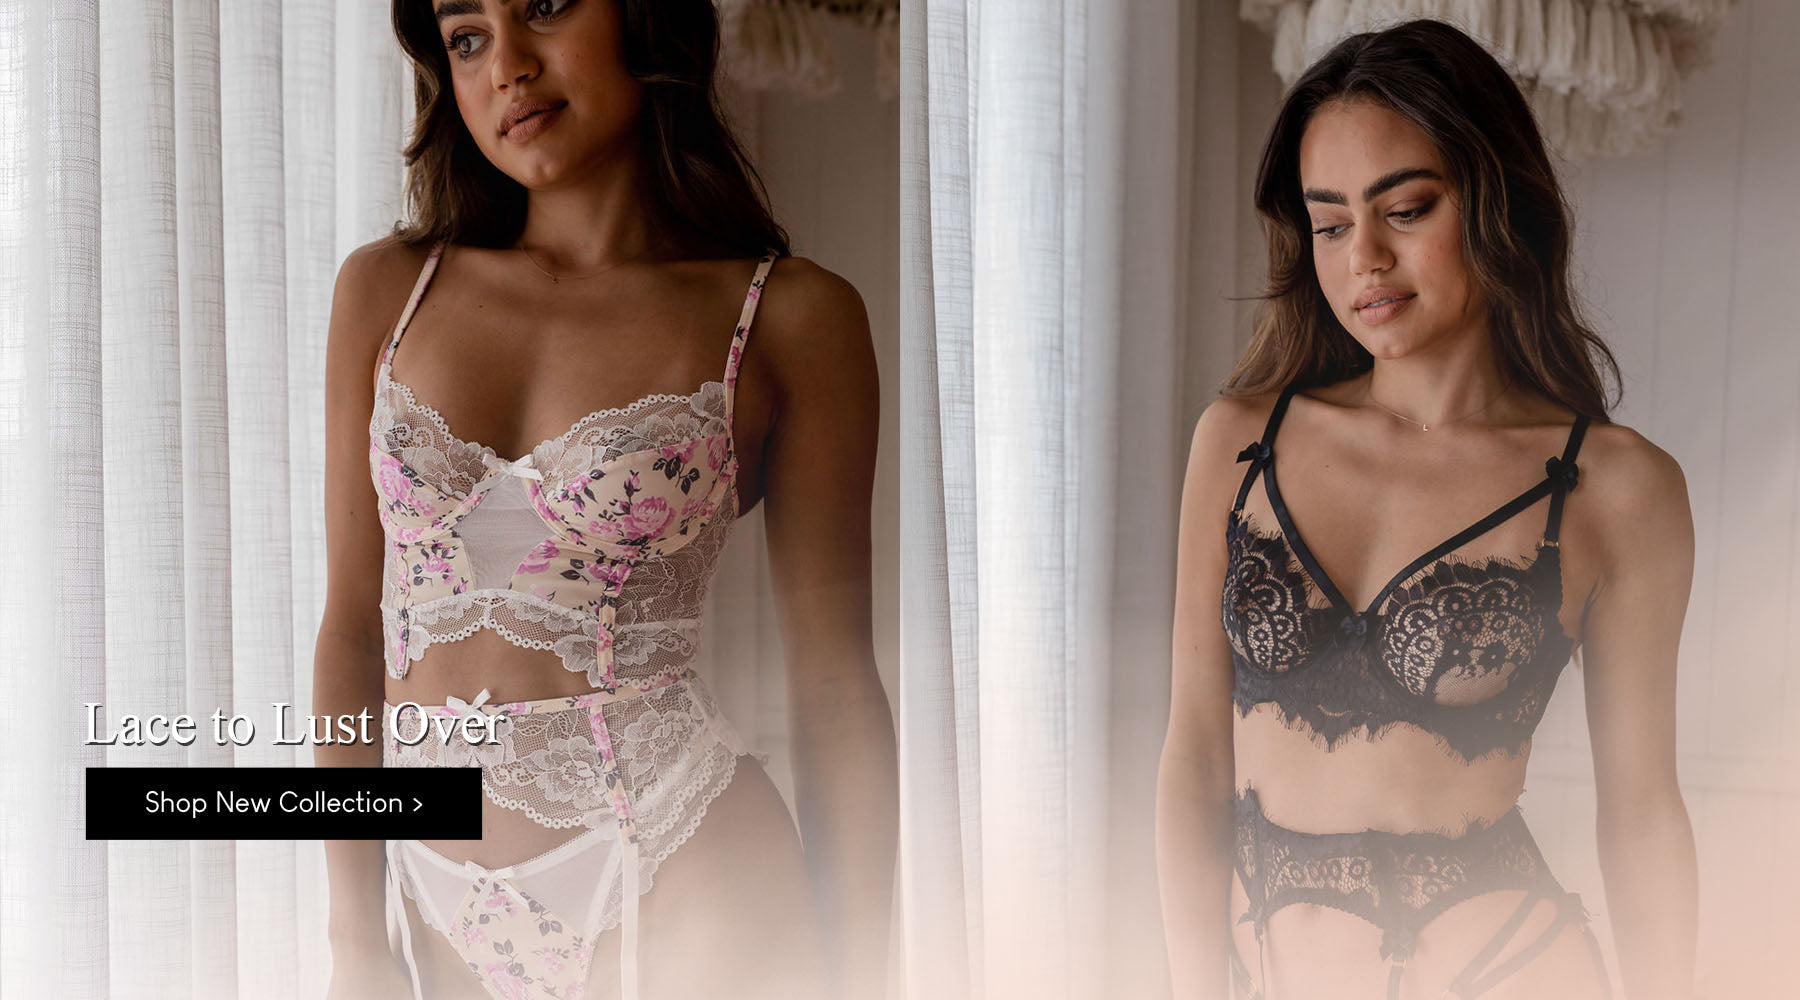 ONE EMPIRE MAKES COMFORTABLE LINGERIE AND SLEEPWEAR FOR WOMEN EVEN MORE AFFORDABLE